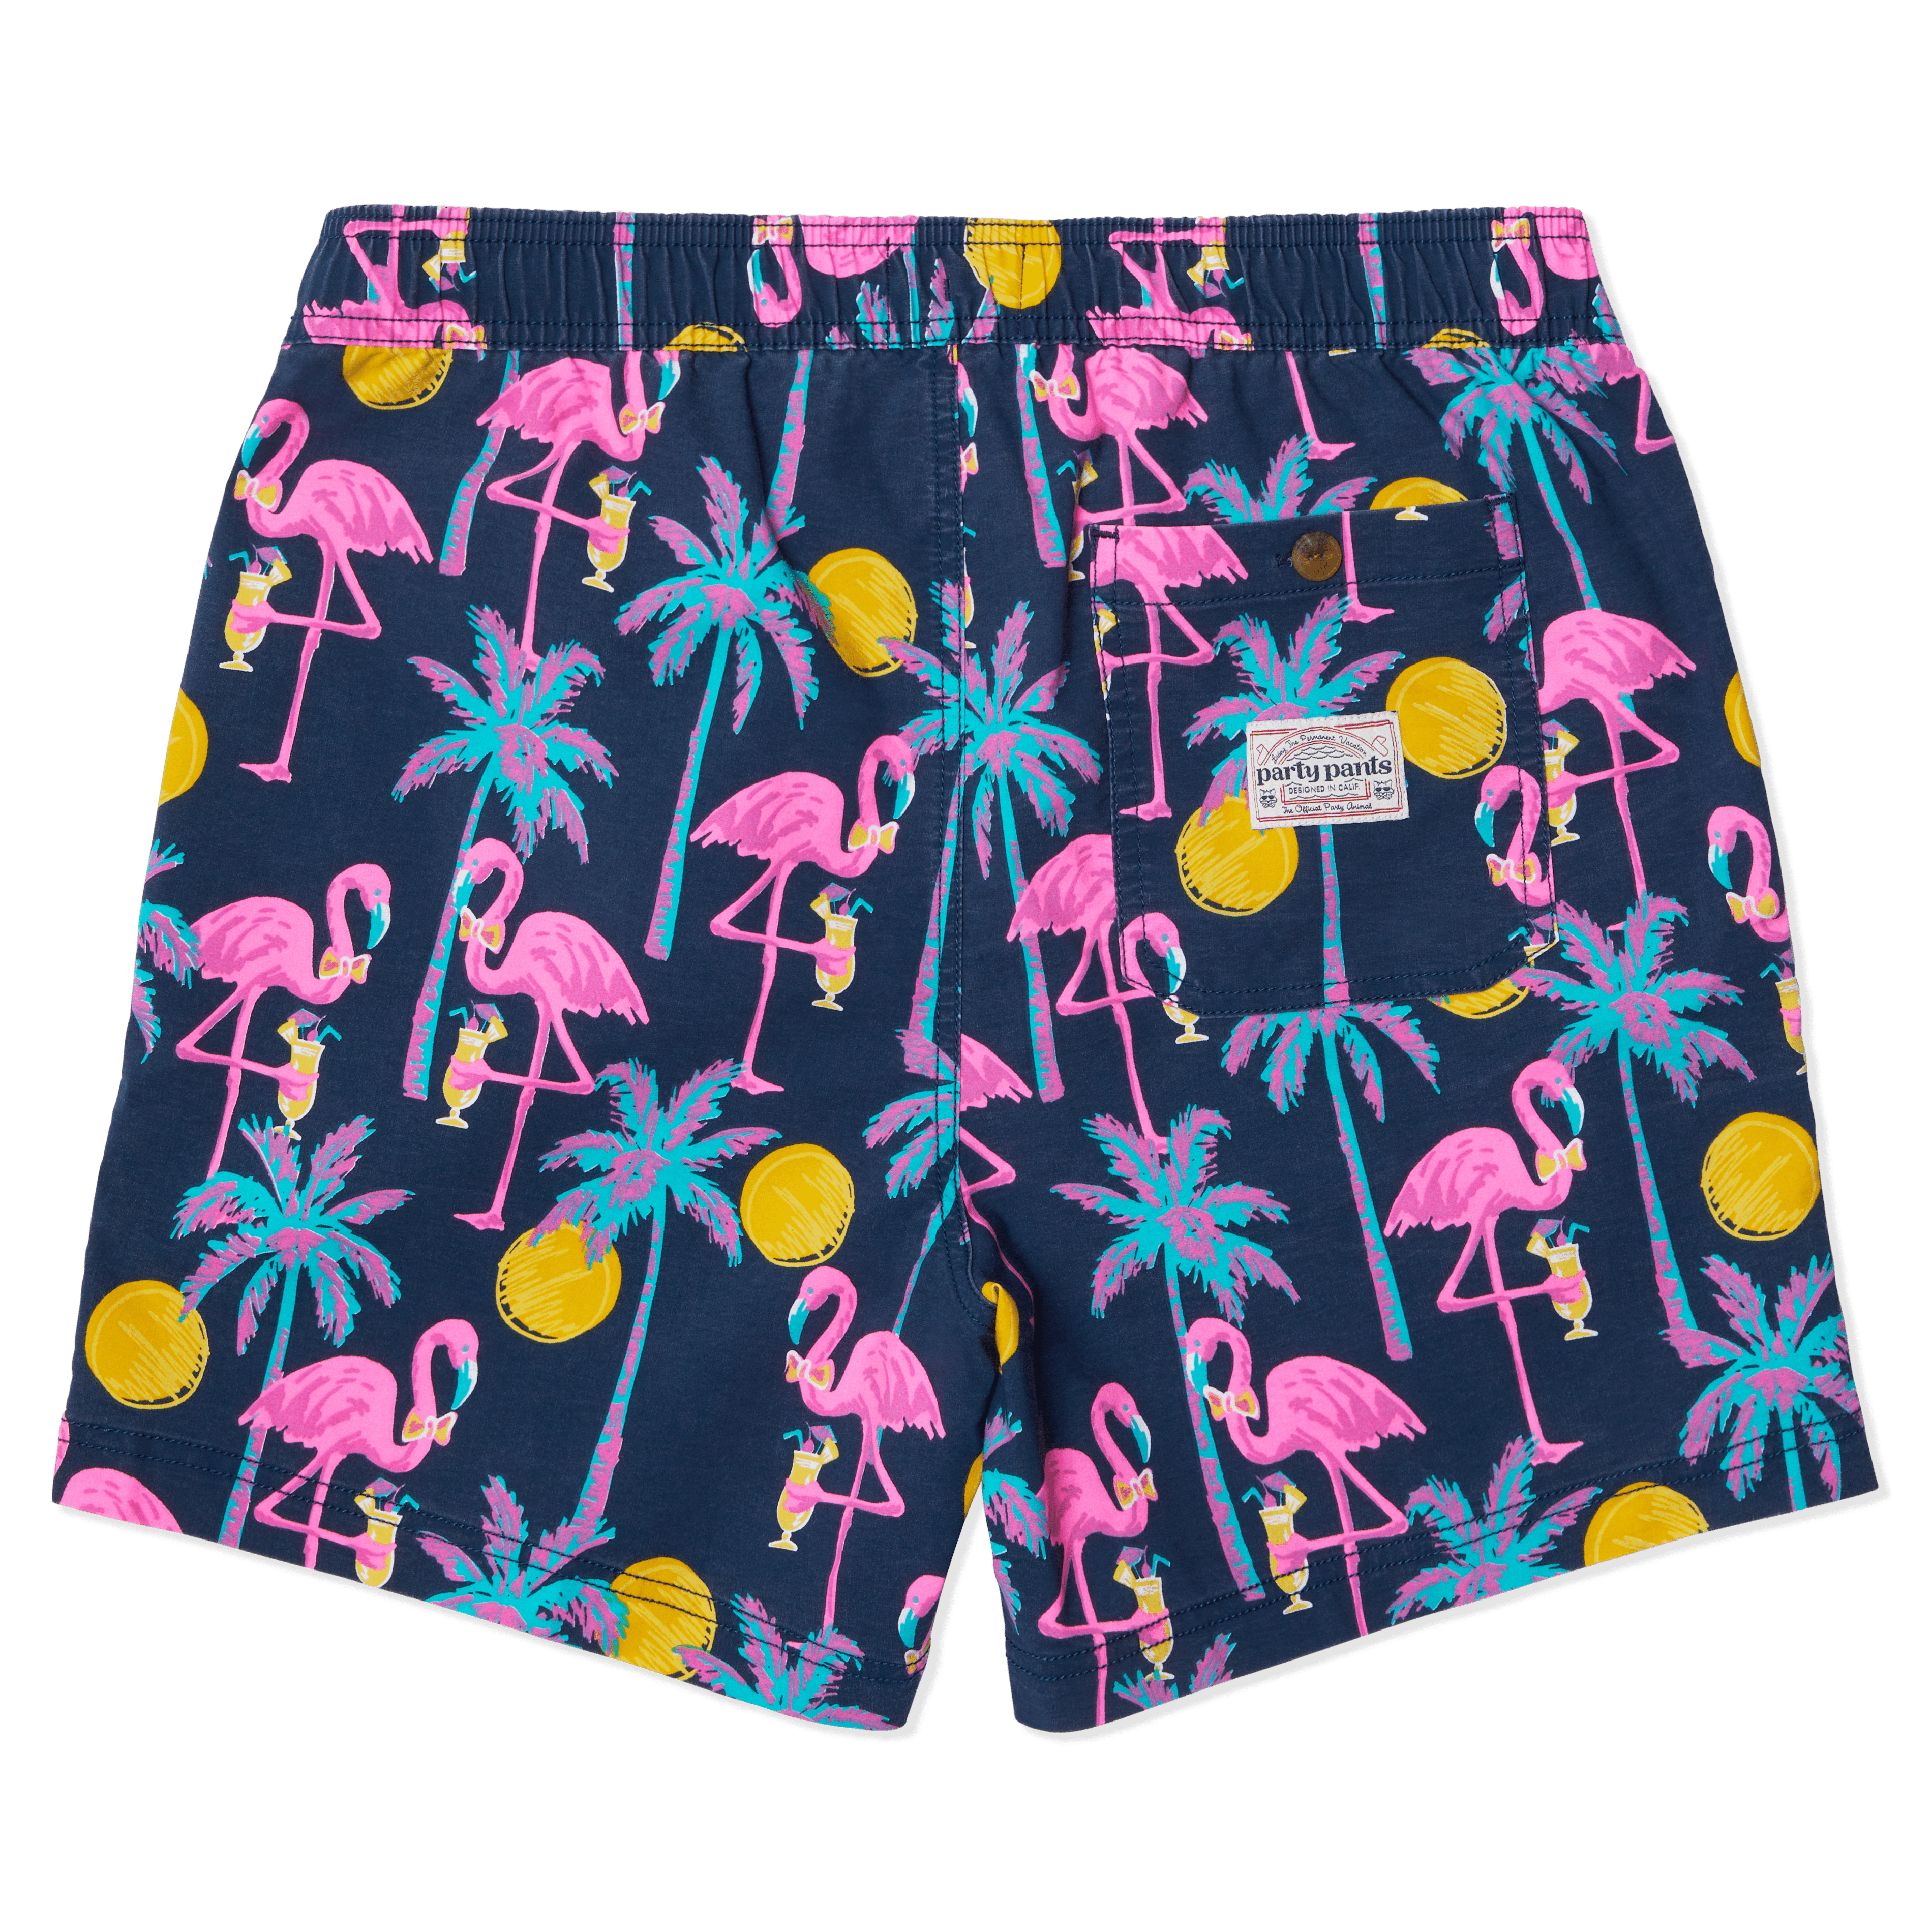 HOWS MAI TAI PARTY STARTER SHORT - NAVY PARTY STARTER SHORTS PARTY PANTS 